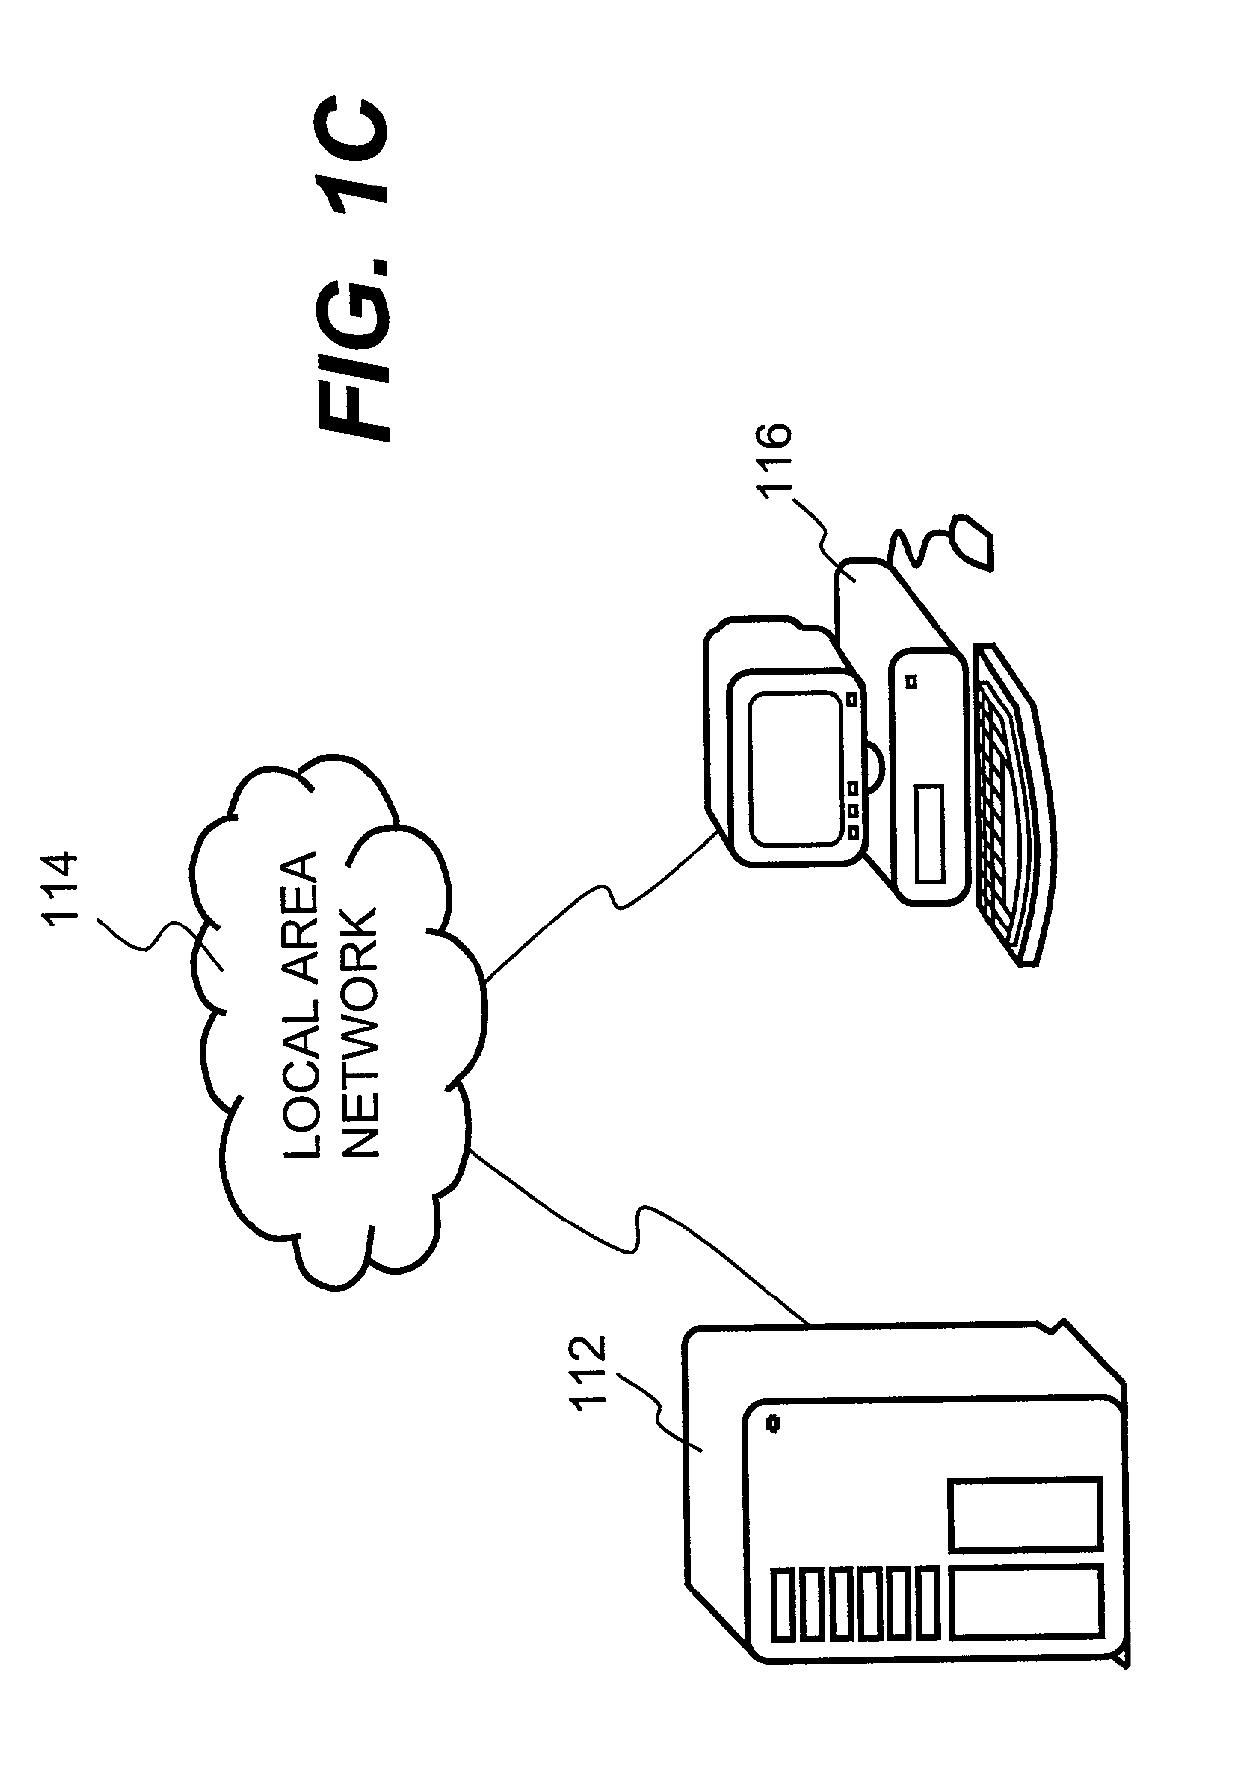 Method and apparatus for accessing secured electronic data off-line